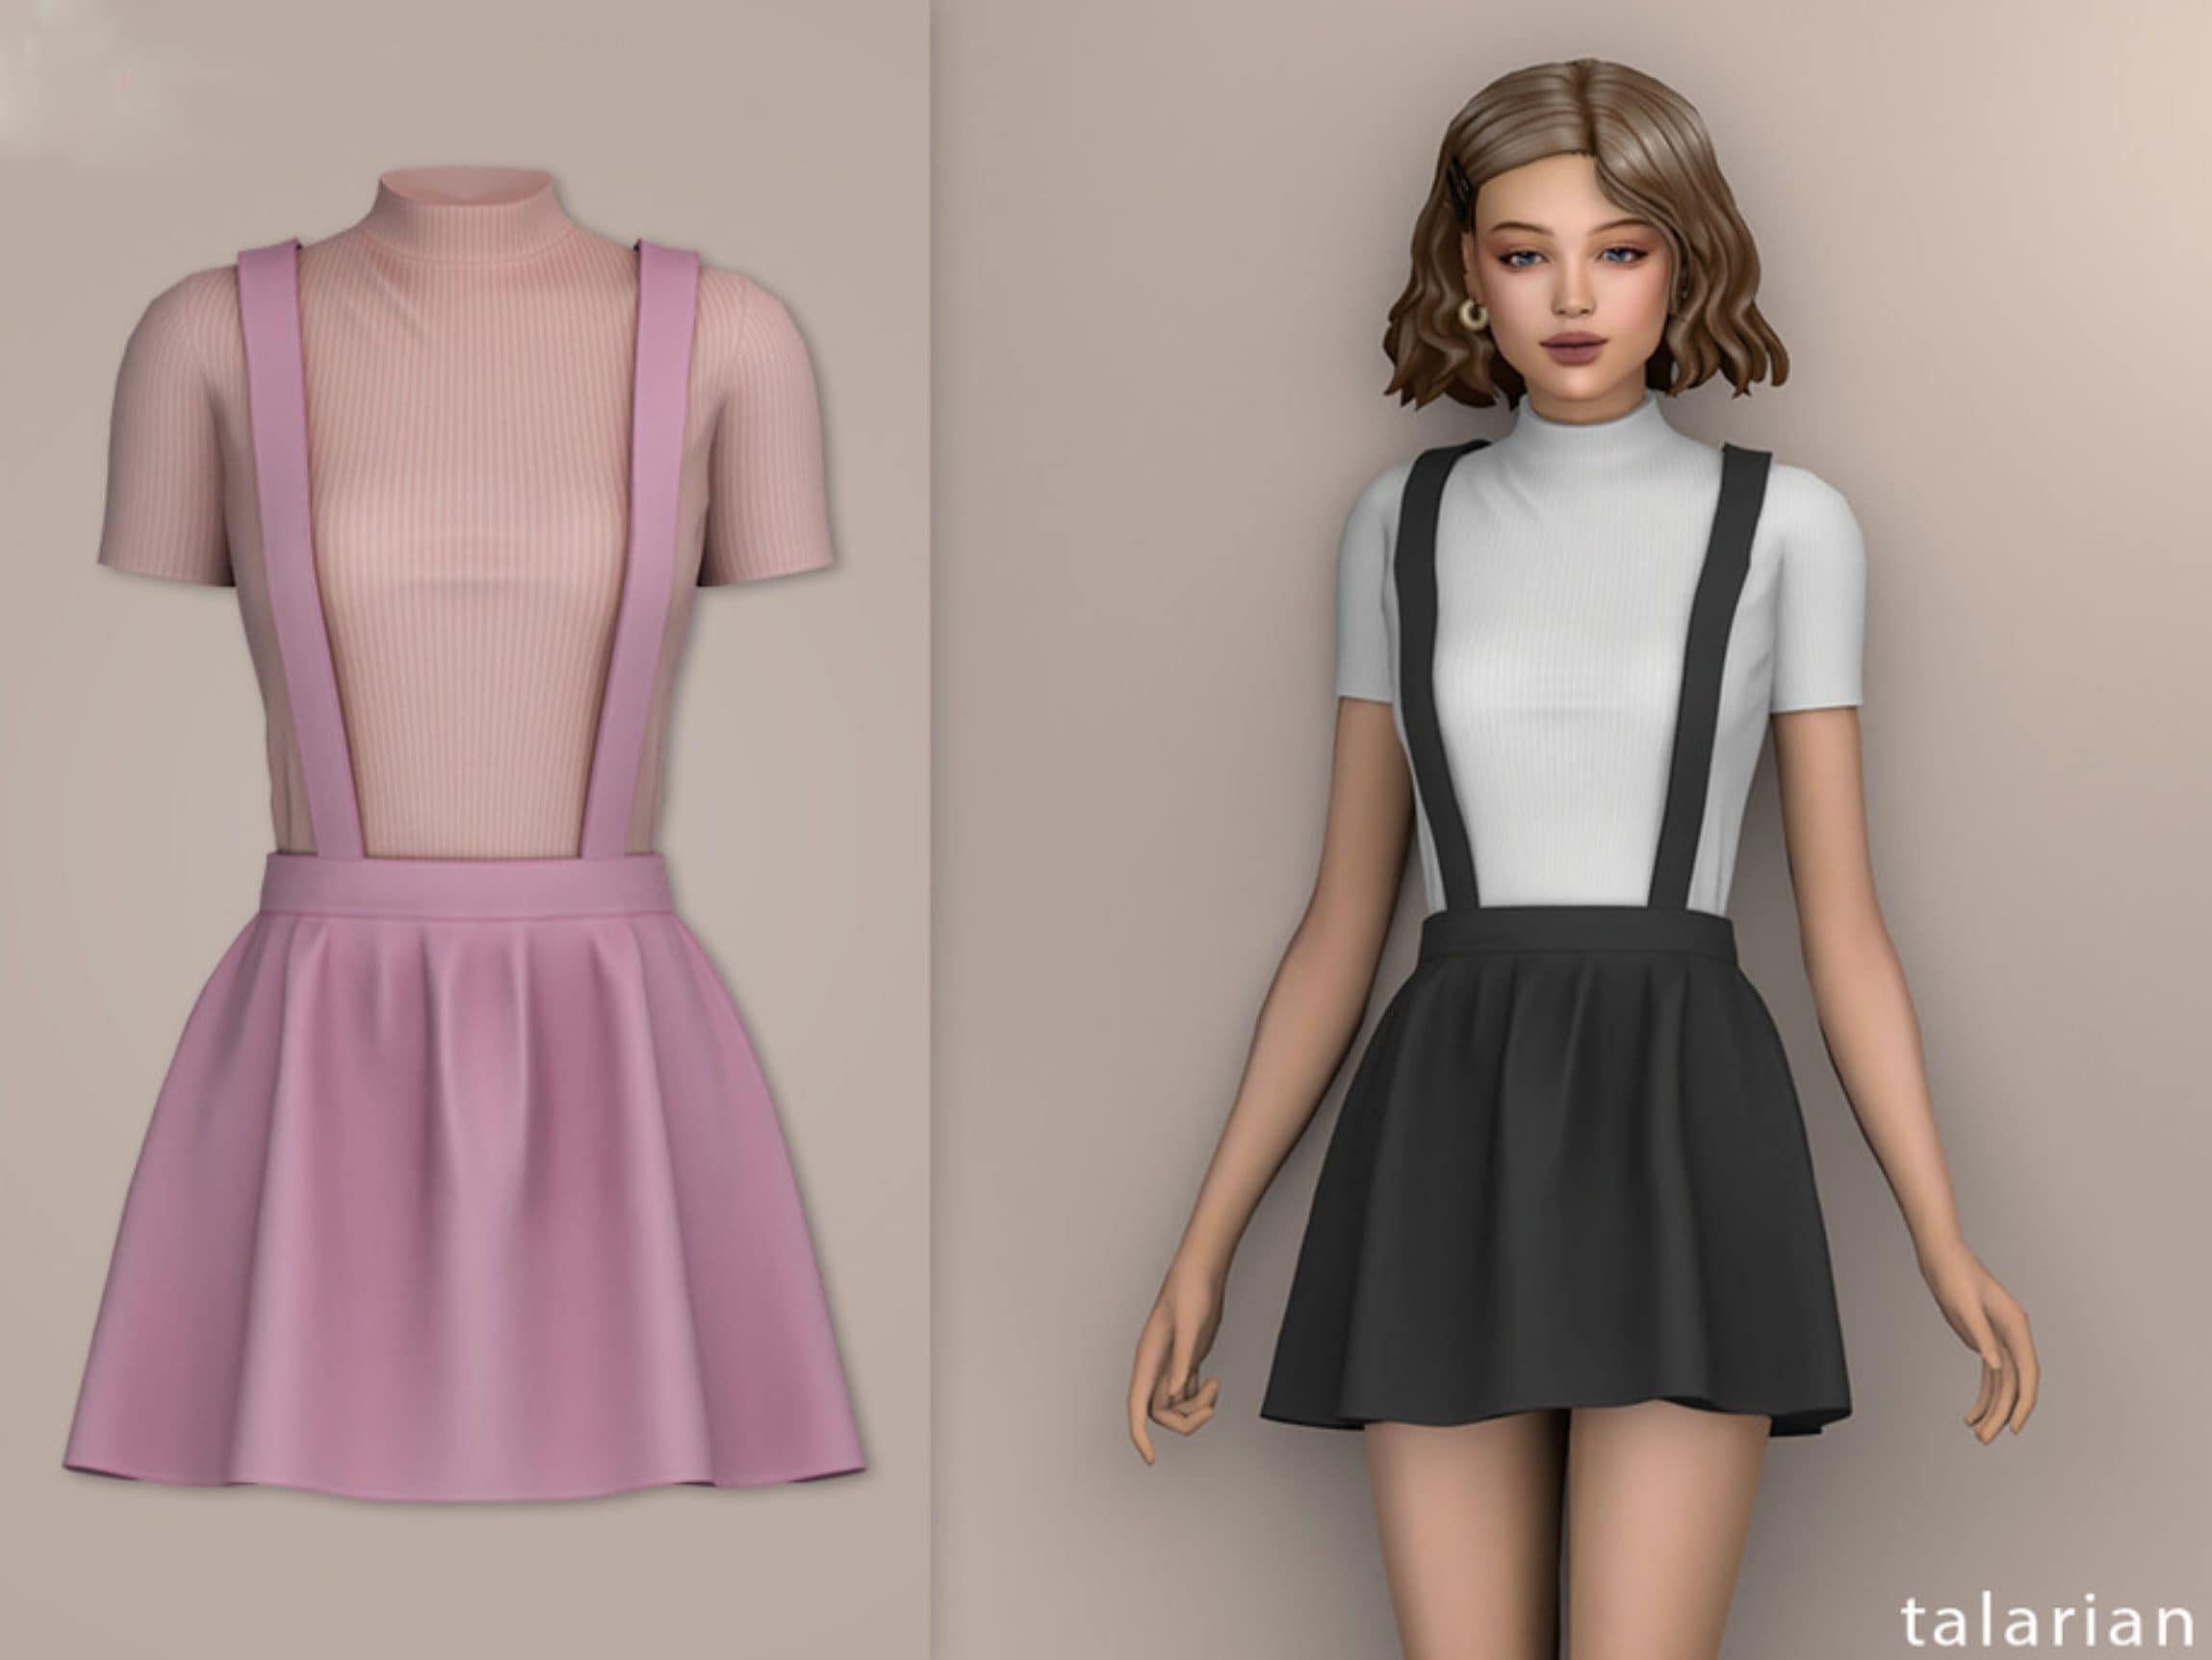 Alyssa Outfit - Sims 4 Mod Download Free